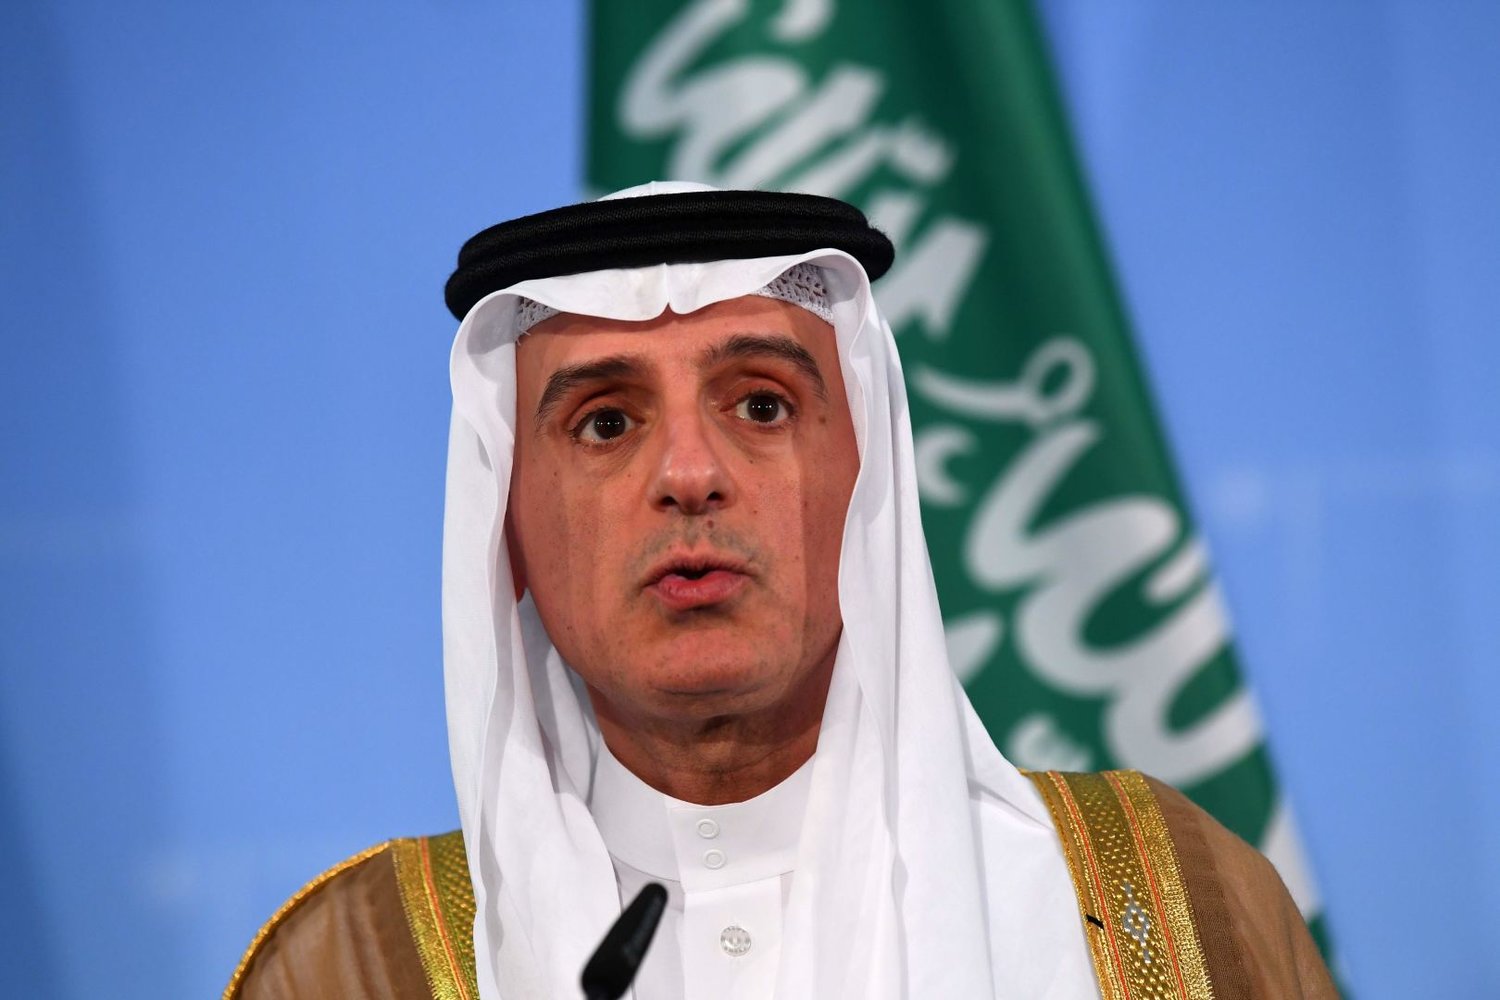 Saudi Foreign Minister Adel al-Jubeir. (Getty Images)